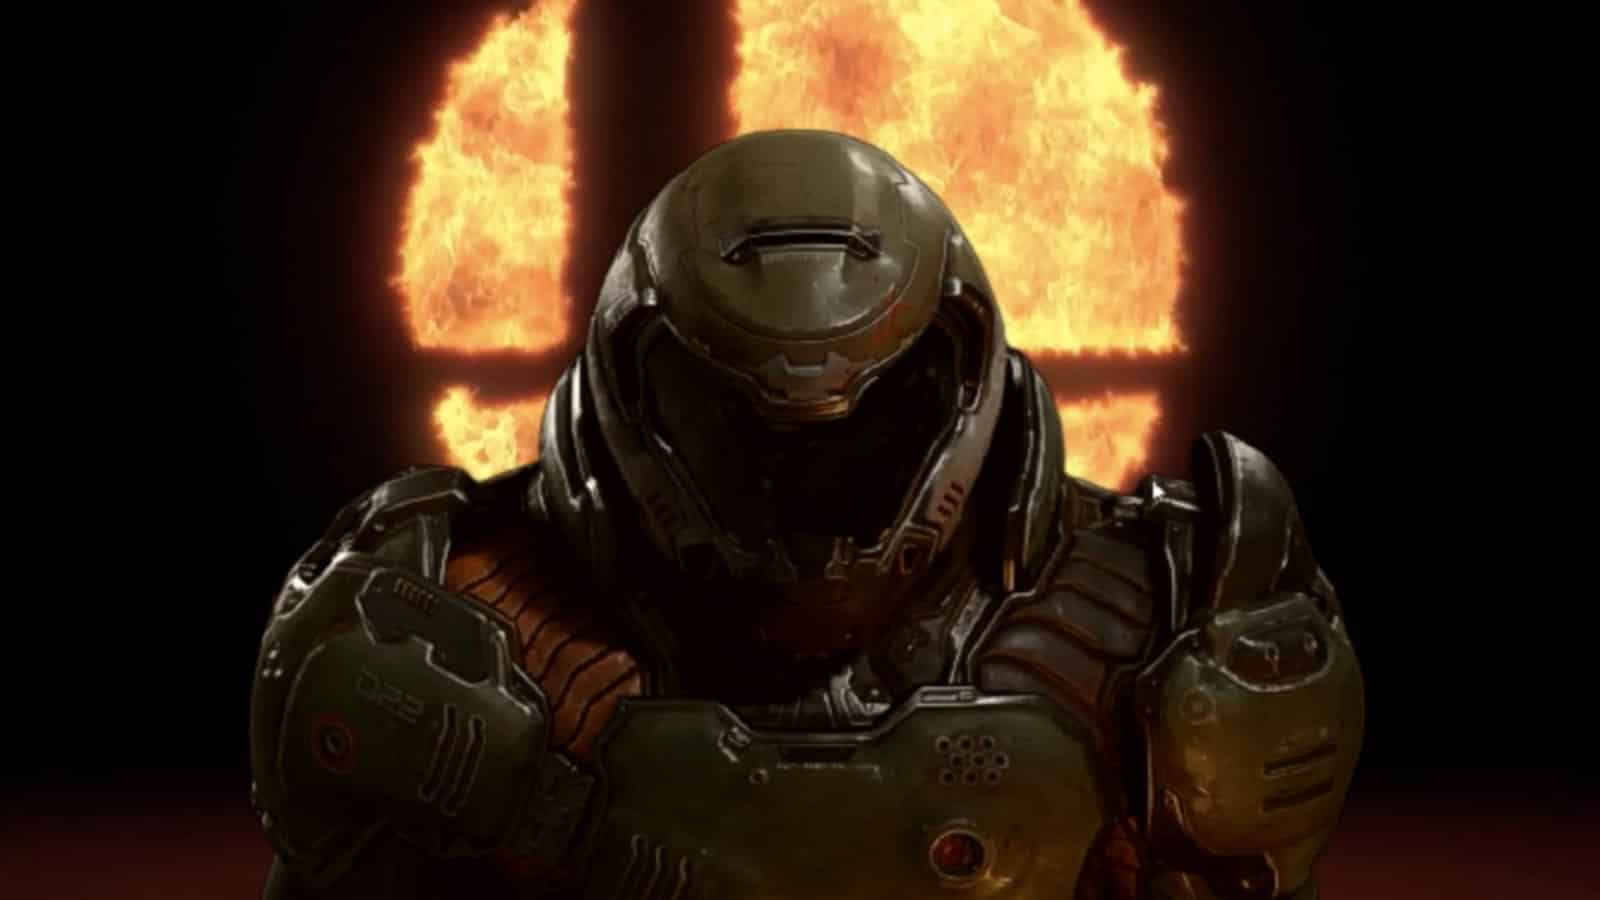 Doomslayer in smash ultimate as DLC fighter